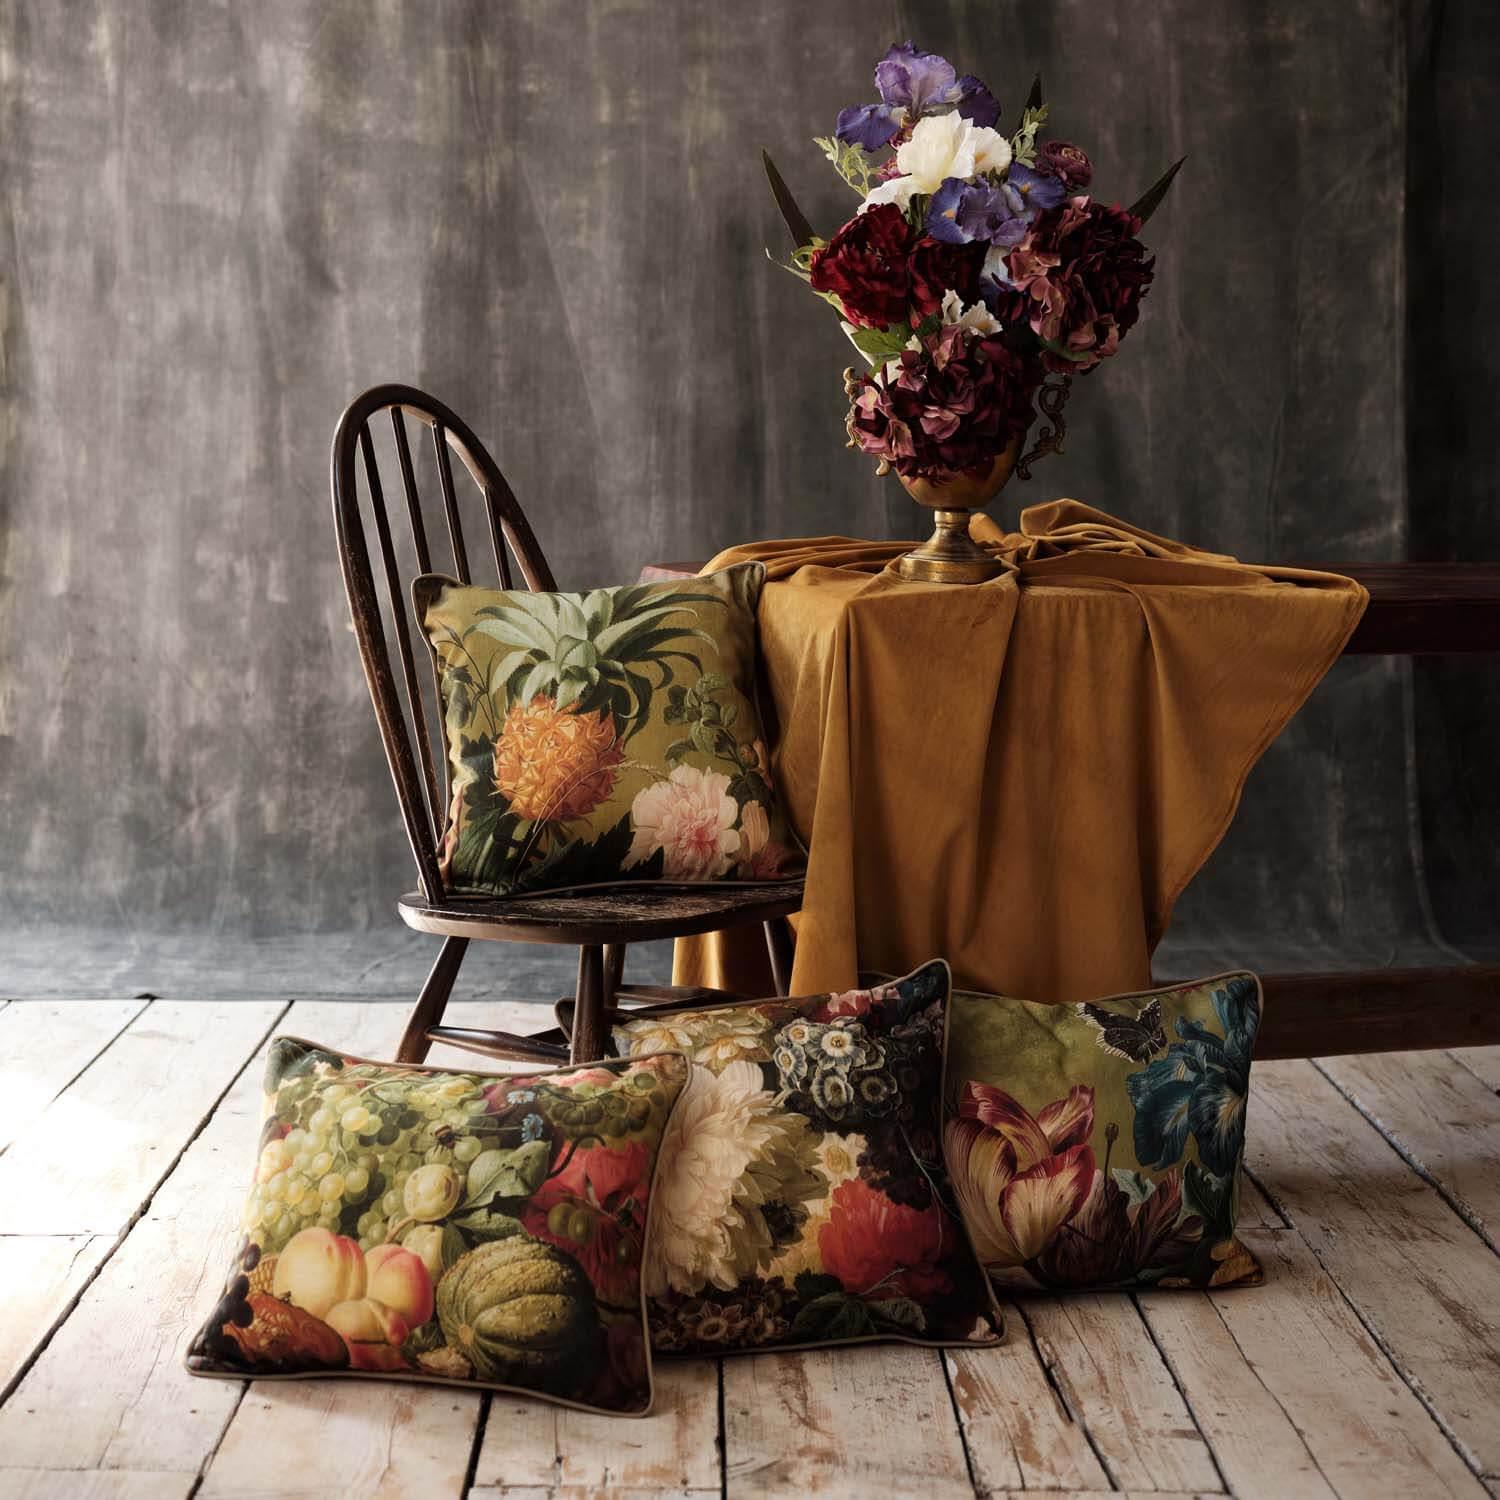 Fruit and Flowers detail Pineapple - van Brussel - National Gallery LUXE Cushion